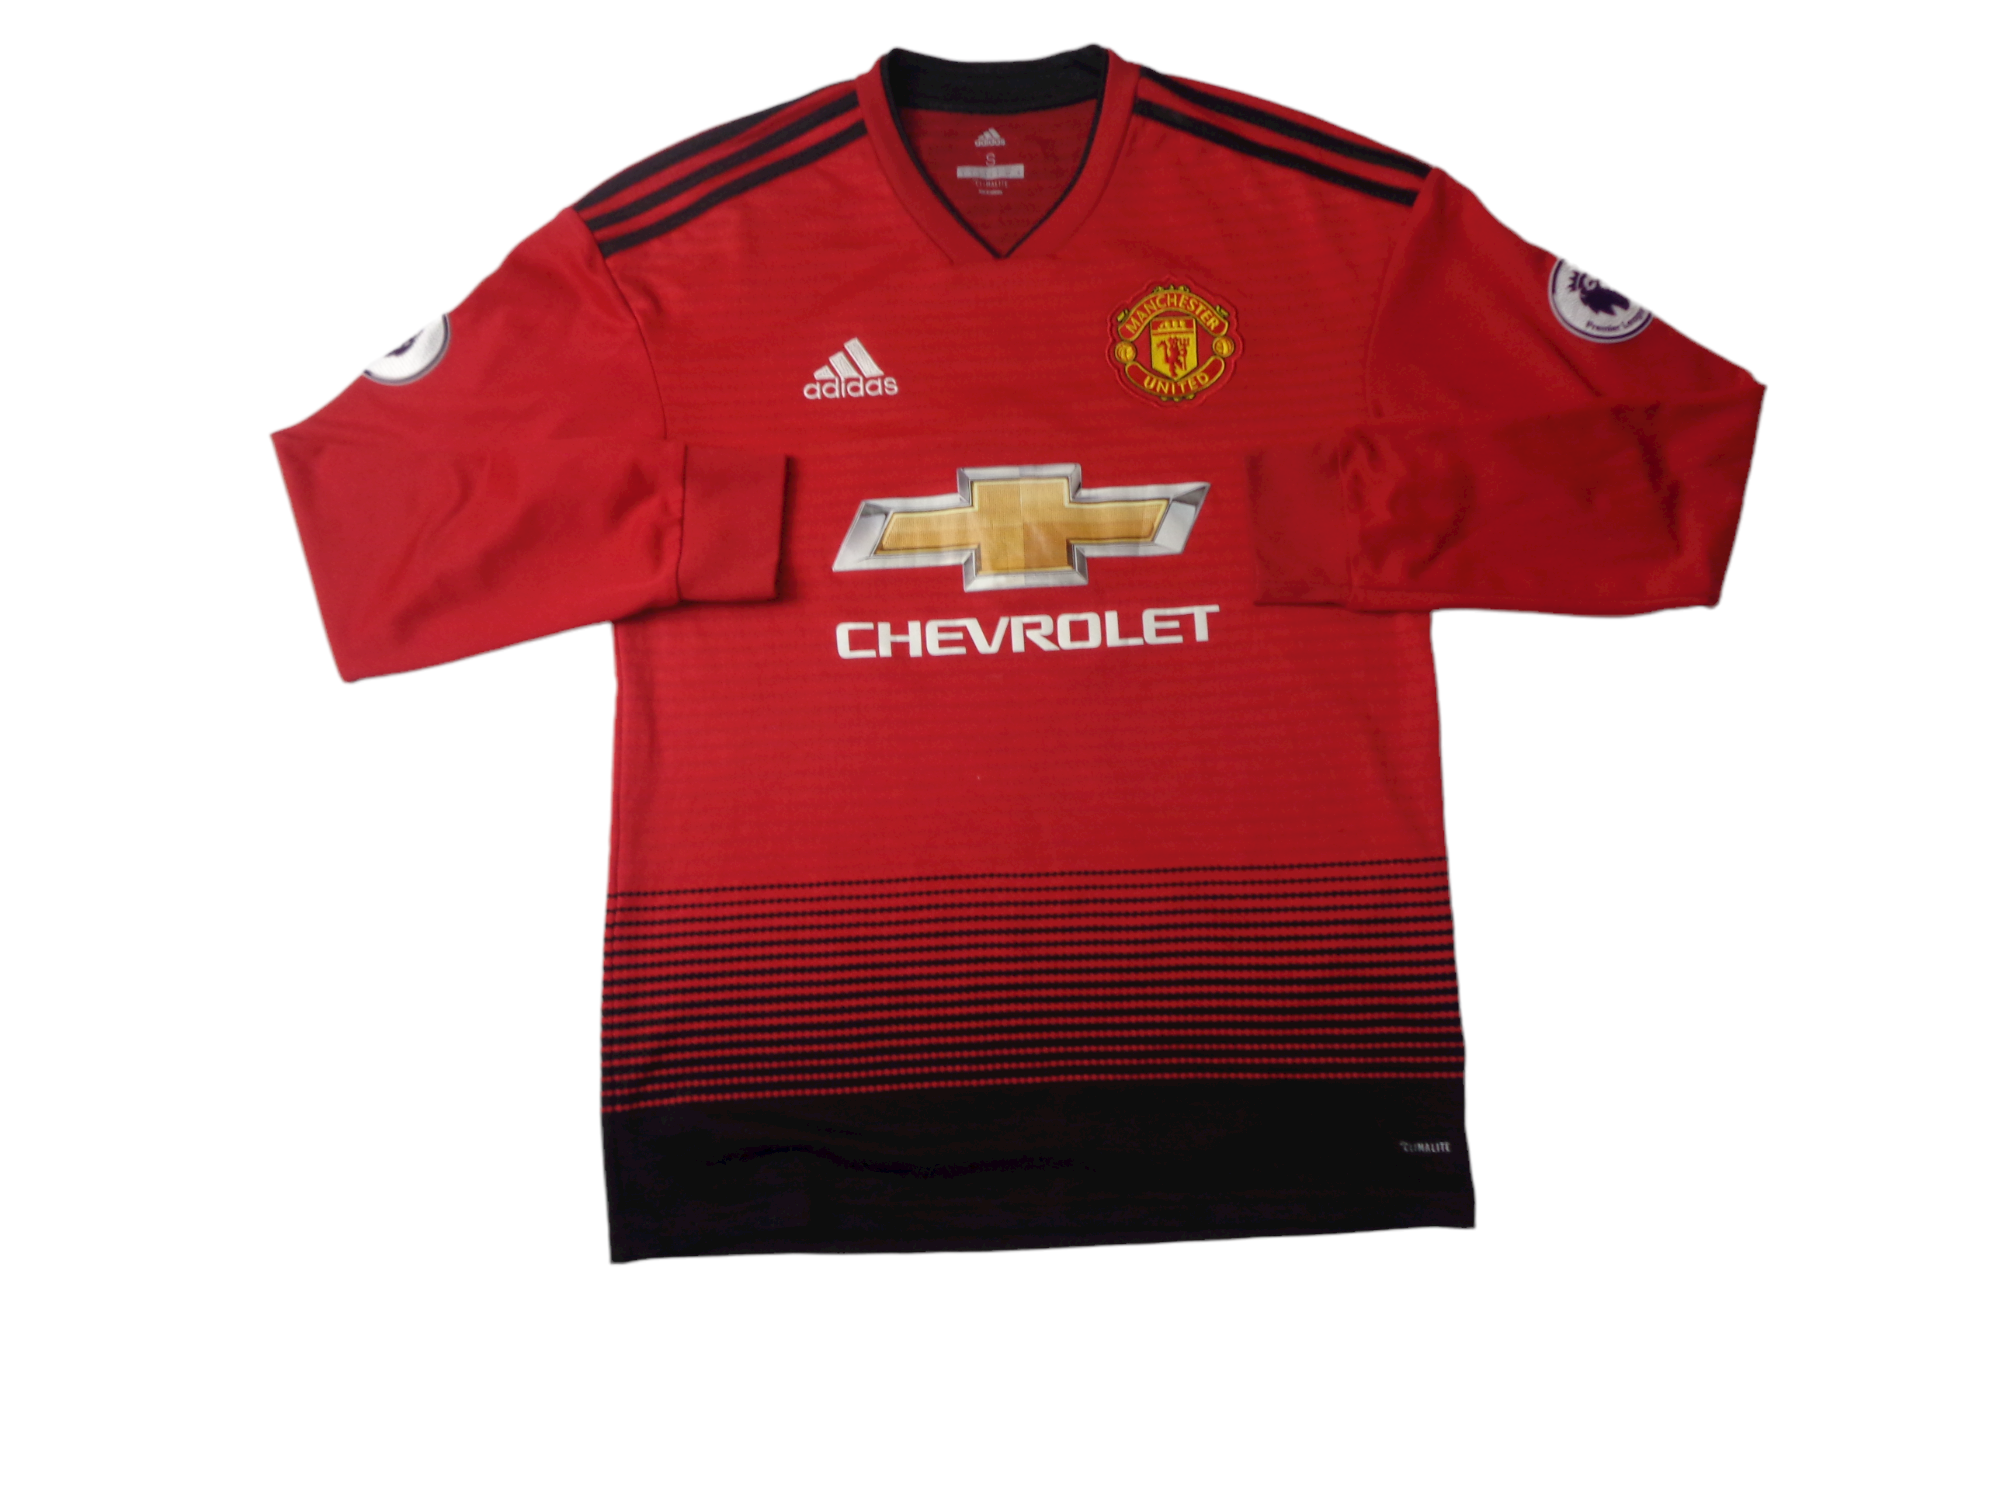 ALEXIS #7 - MANCHESTER UNITED 2018/19 LONG SLEEVE SHIRT - ADIDAS - SIZE SMALL